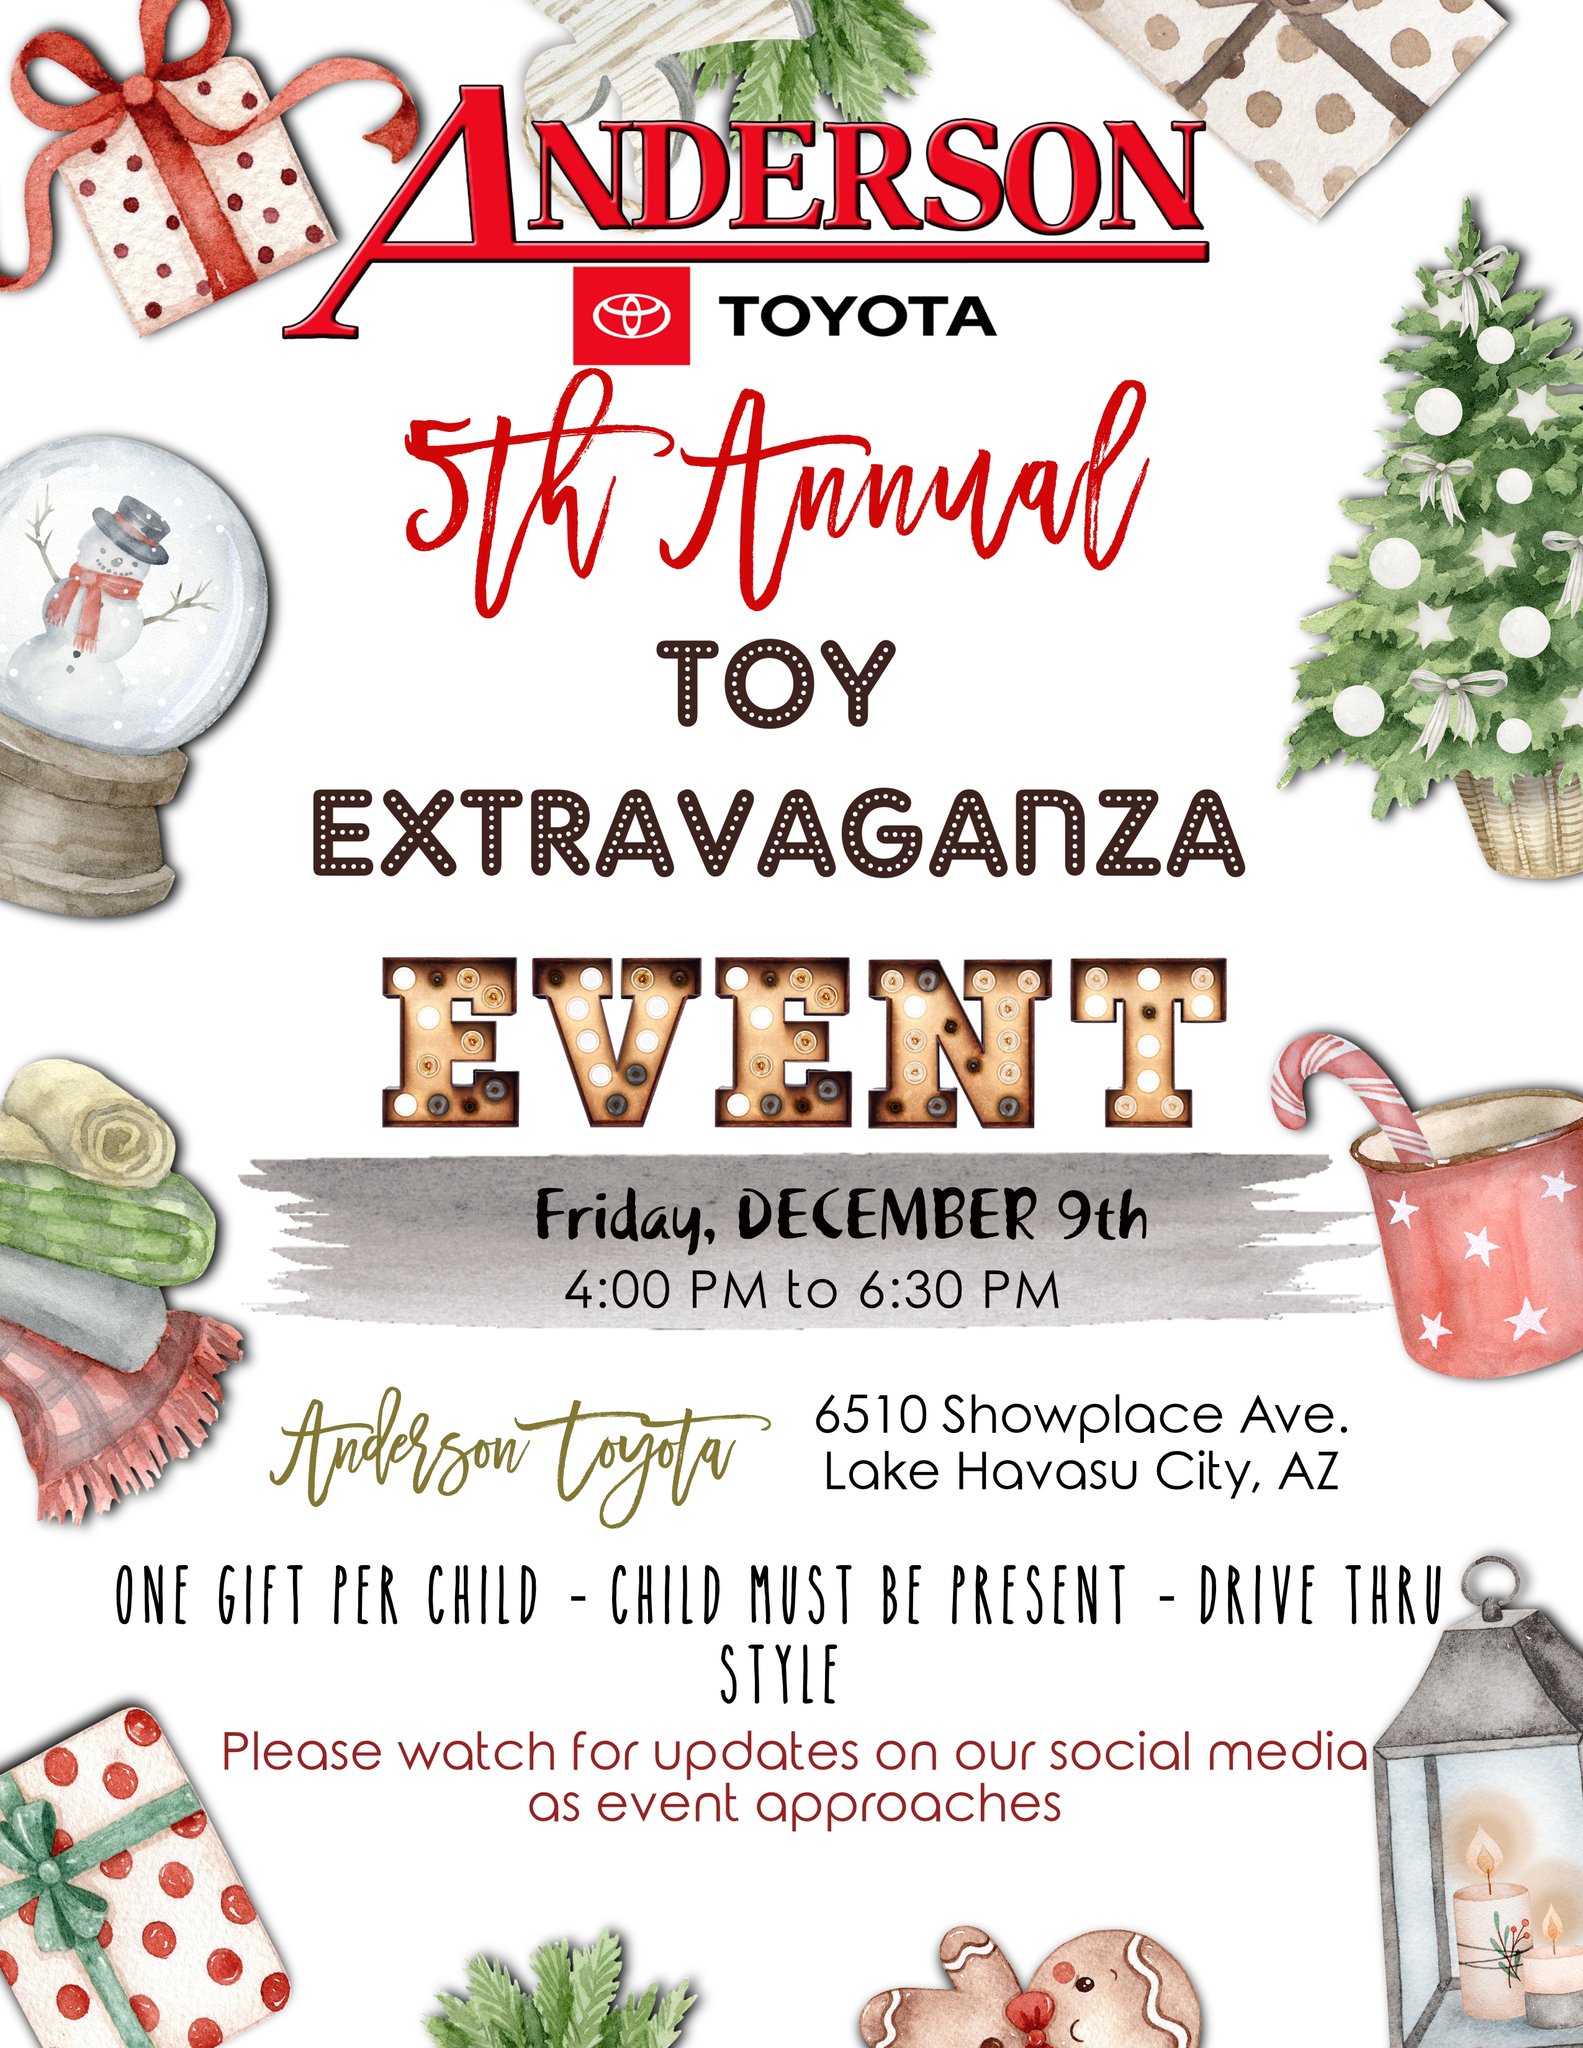 Anderson Toyota 5th Annual Toy Extravaganza